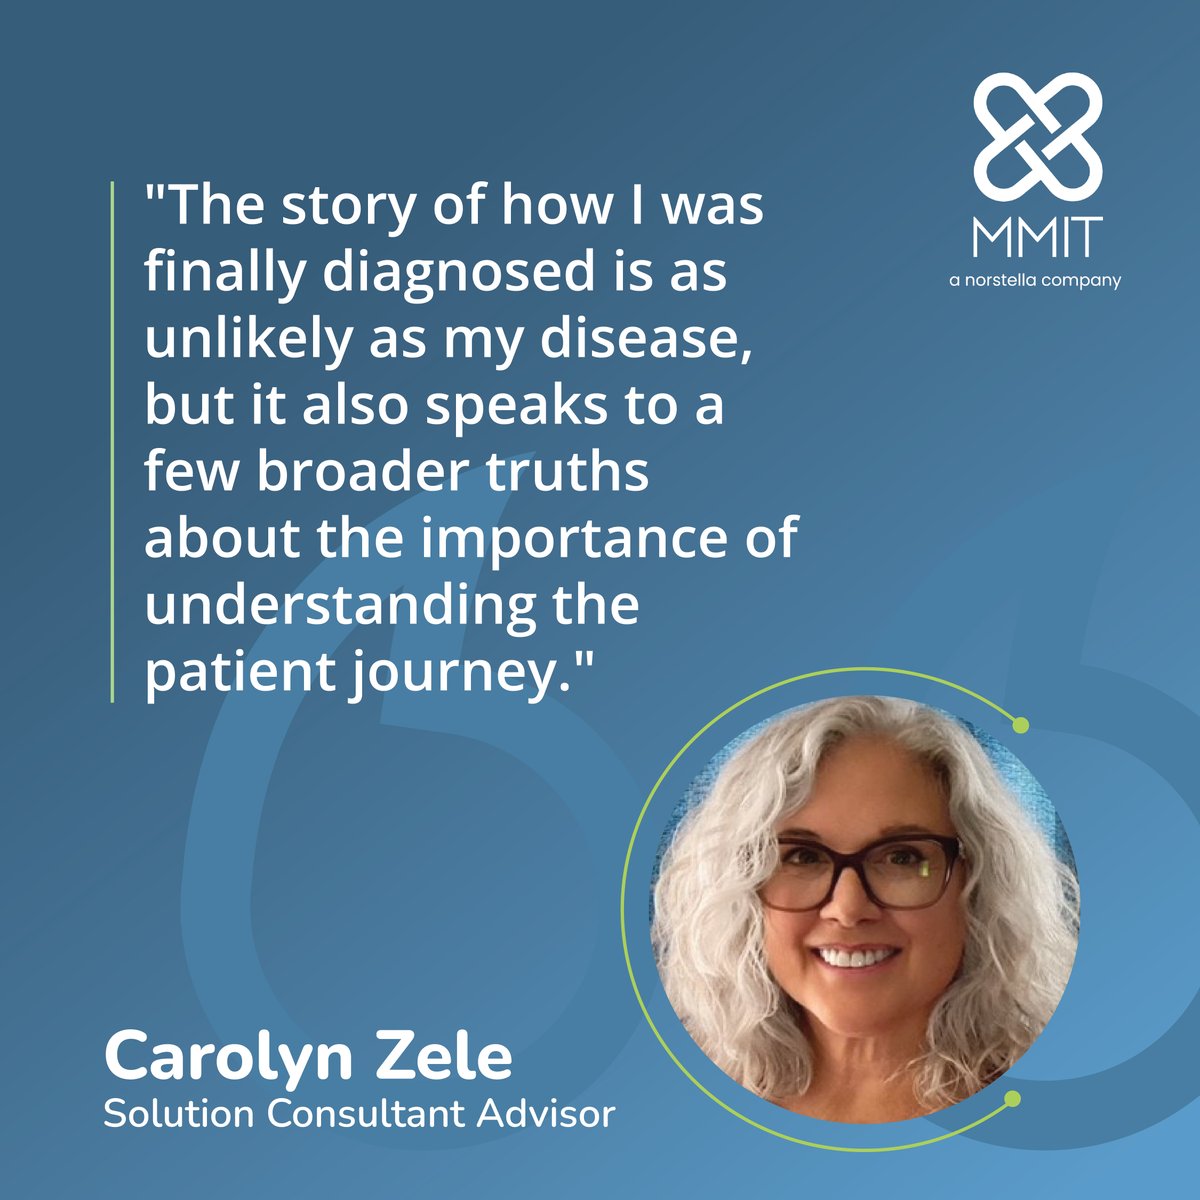 MMIT’s Carolyn Zele shares the personal story of her long road to a diagnosis in @PharmaVoice, explaining how her experience kickstarted her passion for improving #PatientAccess. 

Read her story here: ow.ly/y4Wo50QThCy.

 #PatientExperience #MarketAccess #Pharma